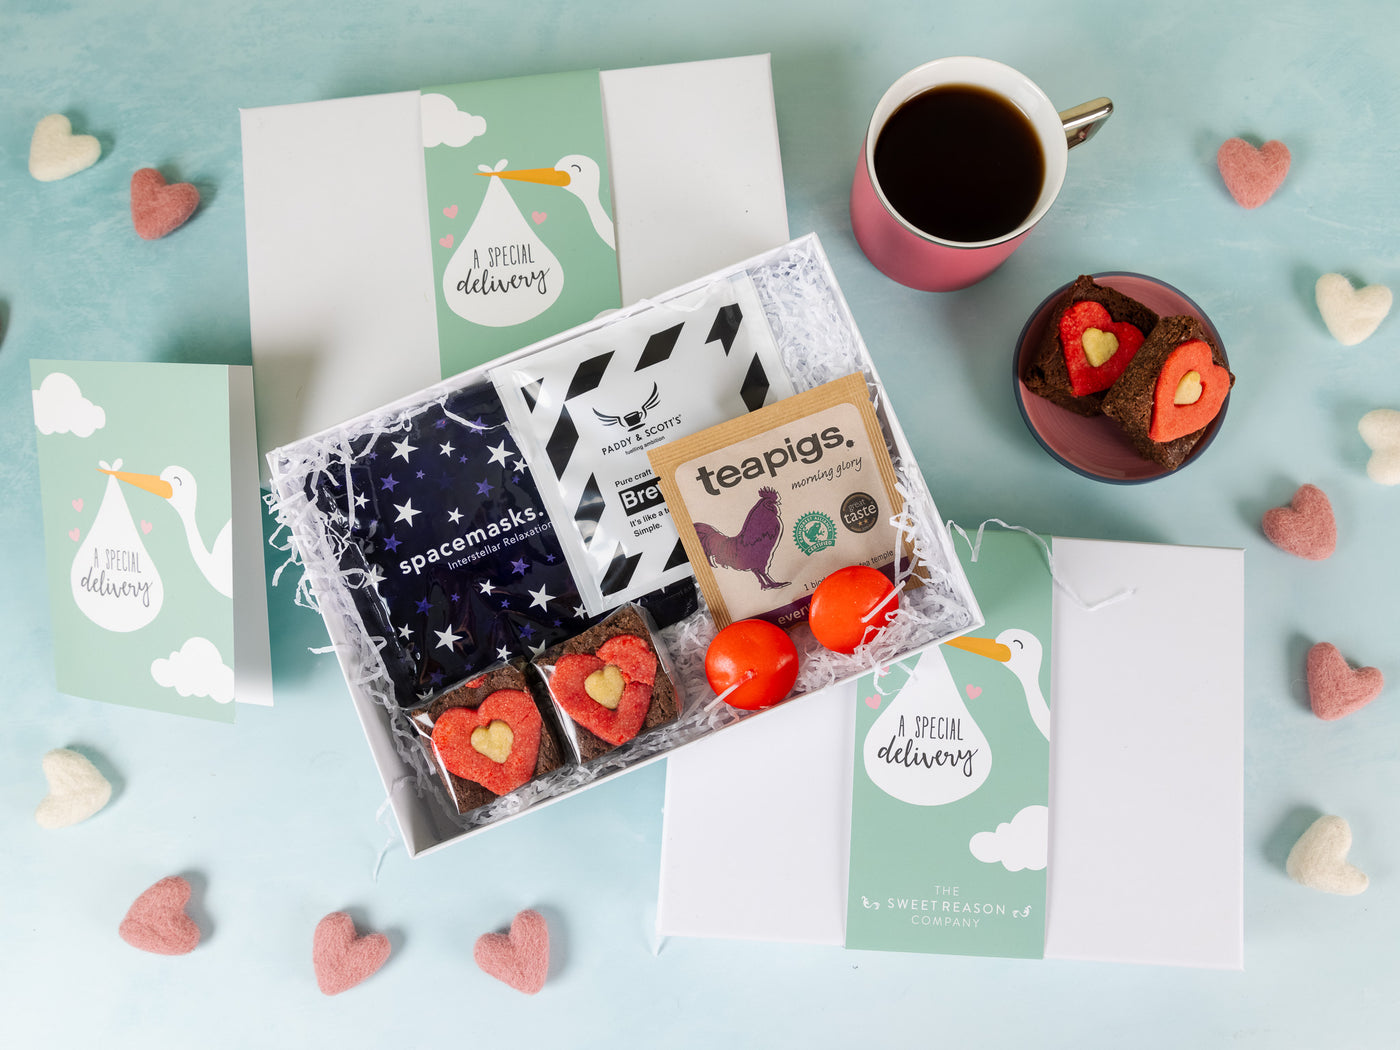 'A Special Delivery' Treats, Tea & Coffee Gift